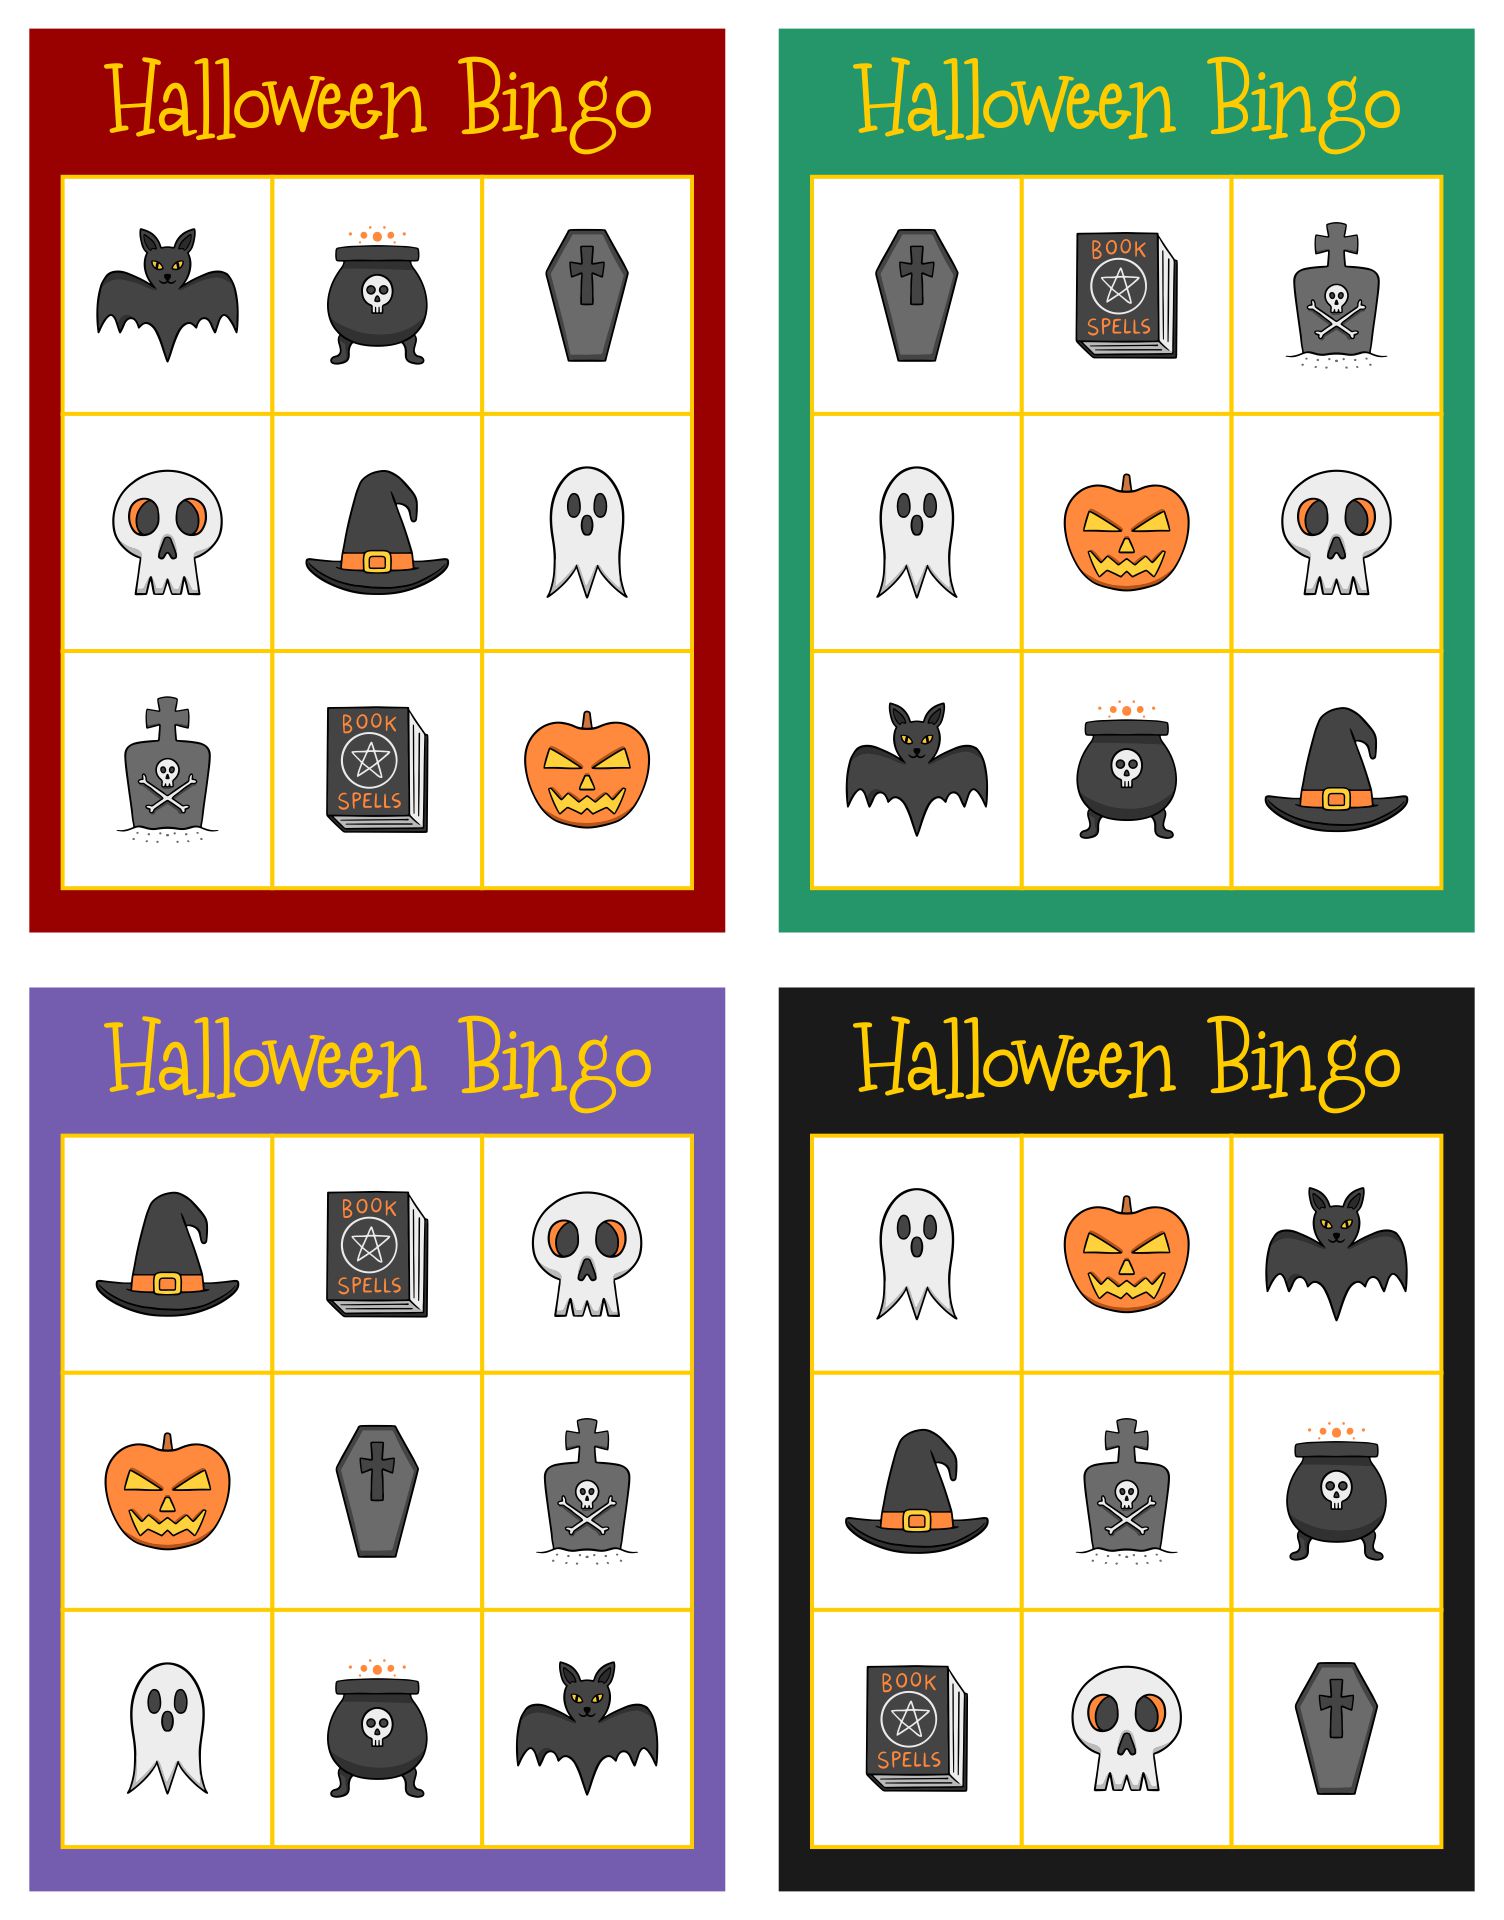 Halloween Games Ideas For Party